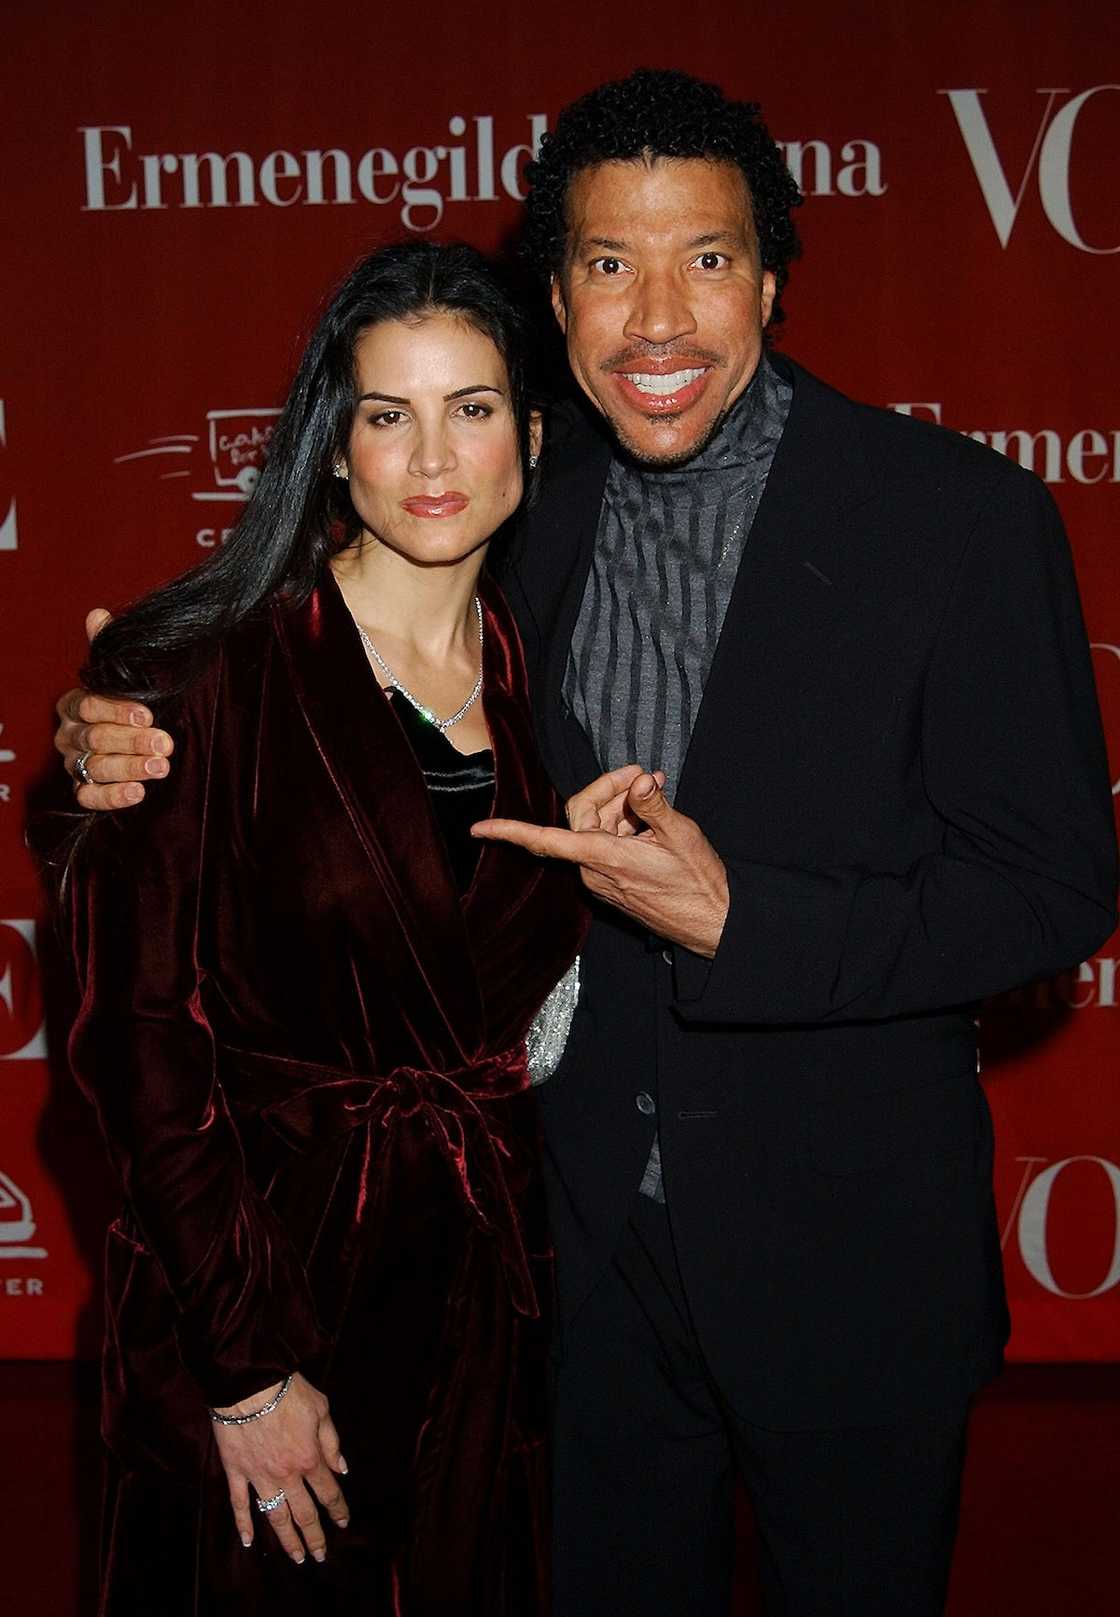 What happened to Lionel Richie's marriage?